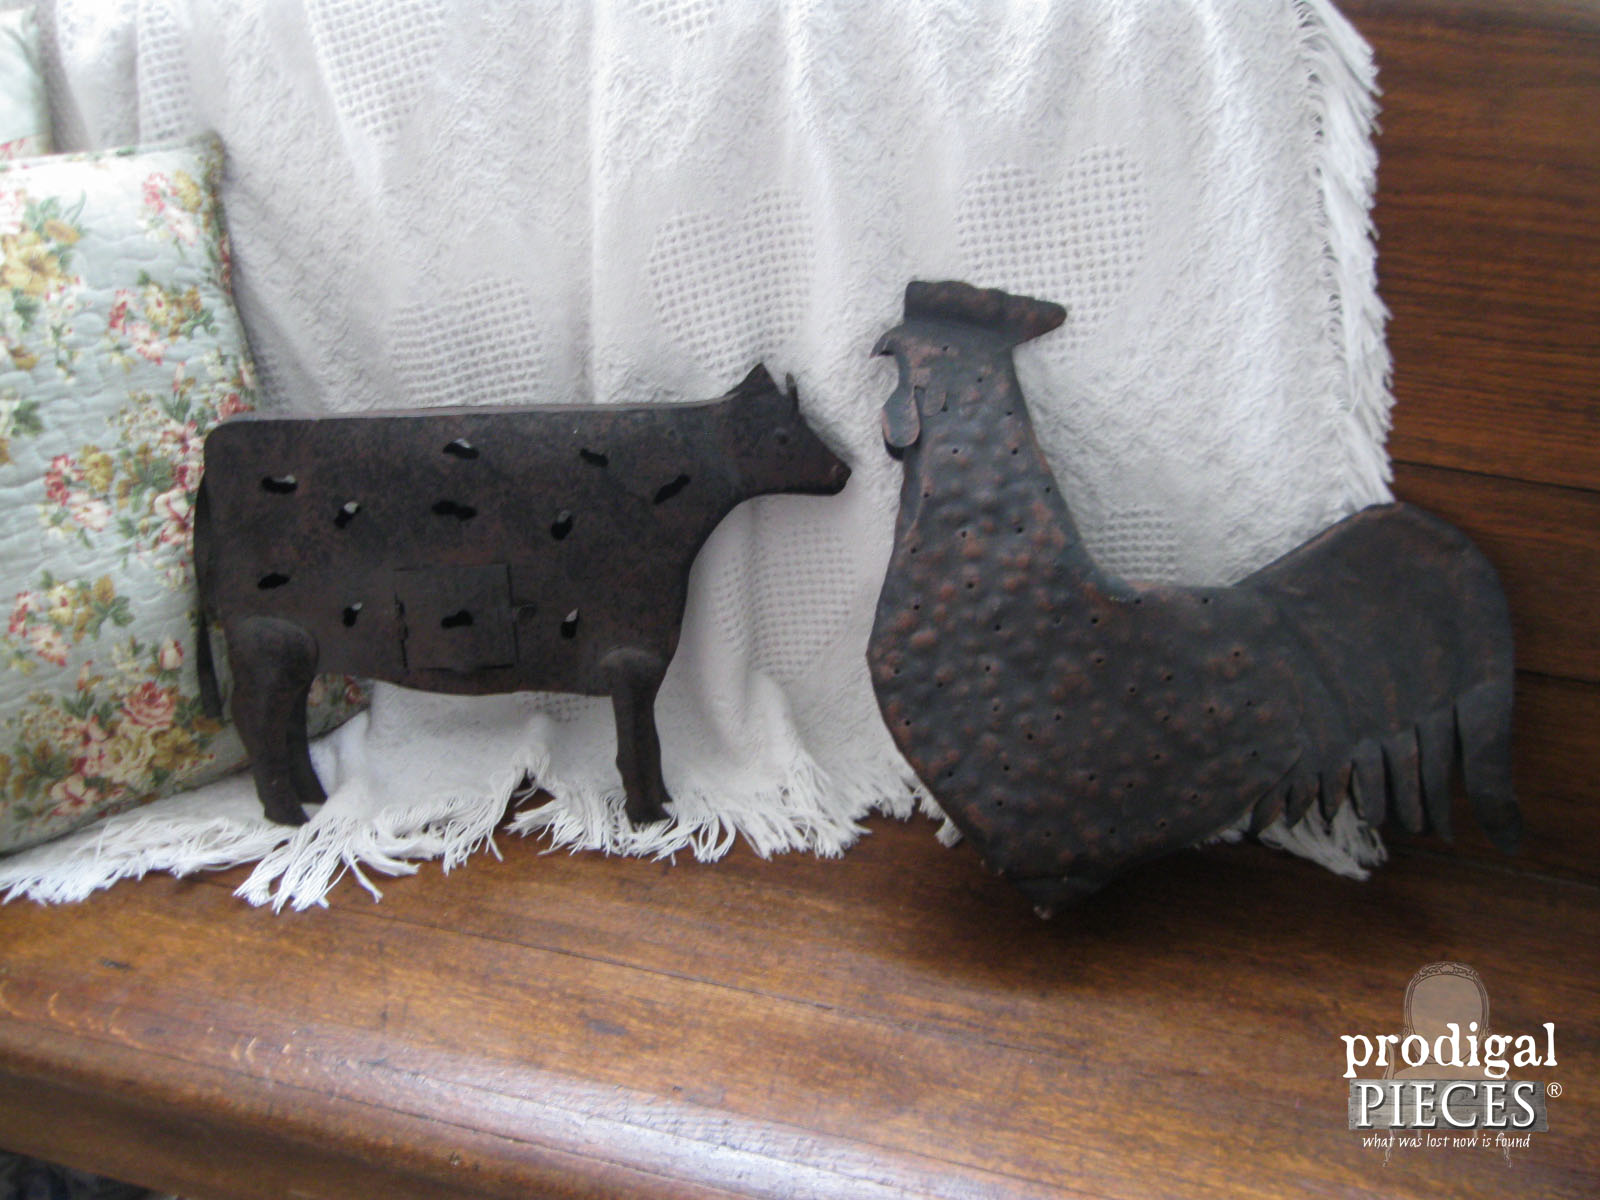 Thrifted Metal Cow and Rooster | Prodigal Pieces | www.prodigalpieces.com